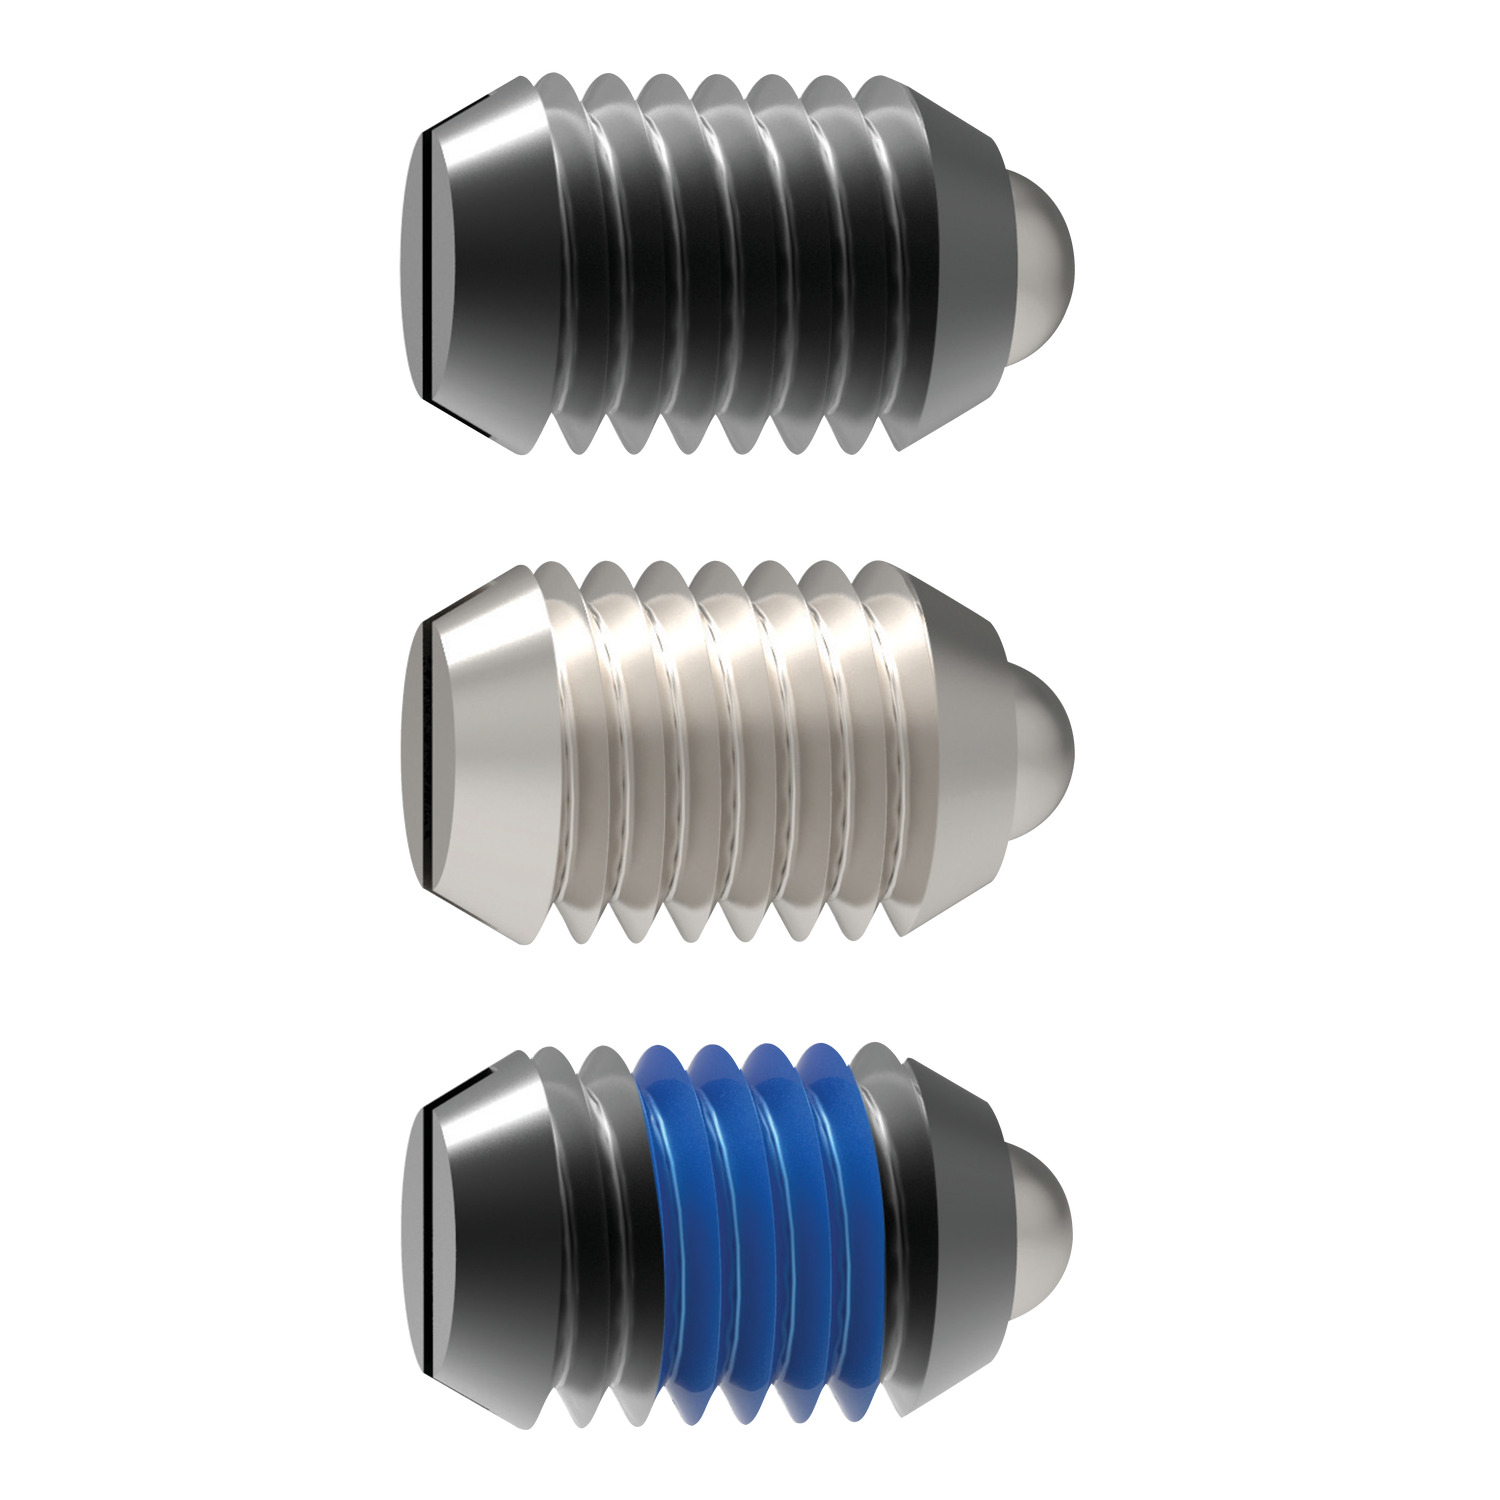 Spring Plungers - IMPERIAL Ball and slot spring plungers with imperial sizing. Available in stainless steel or steel. Spring loads are marked with lines, special types are available on request.